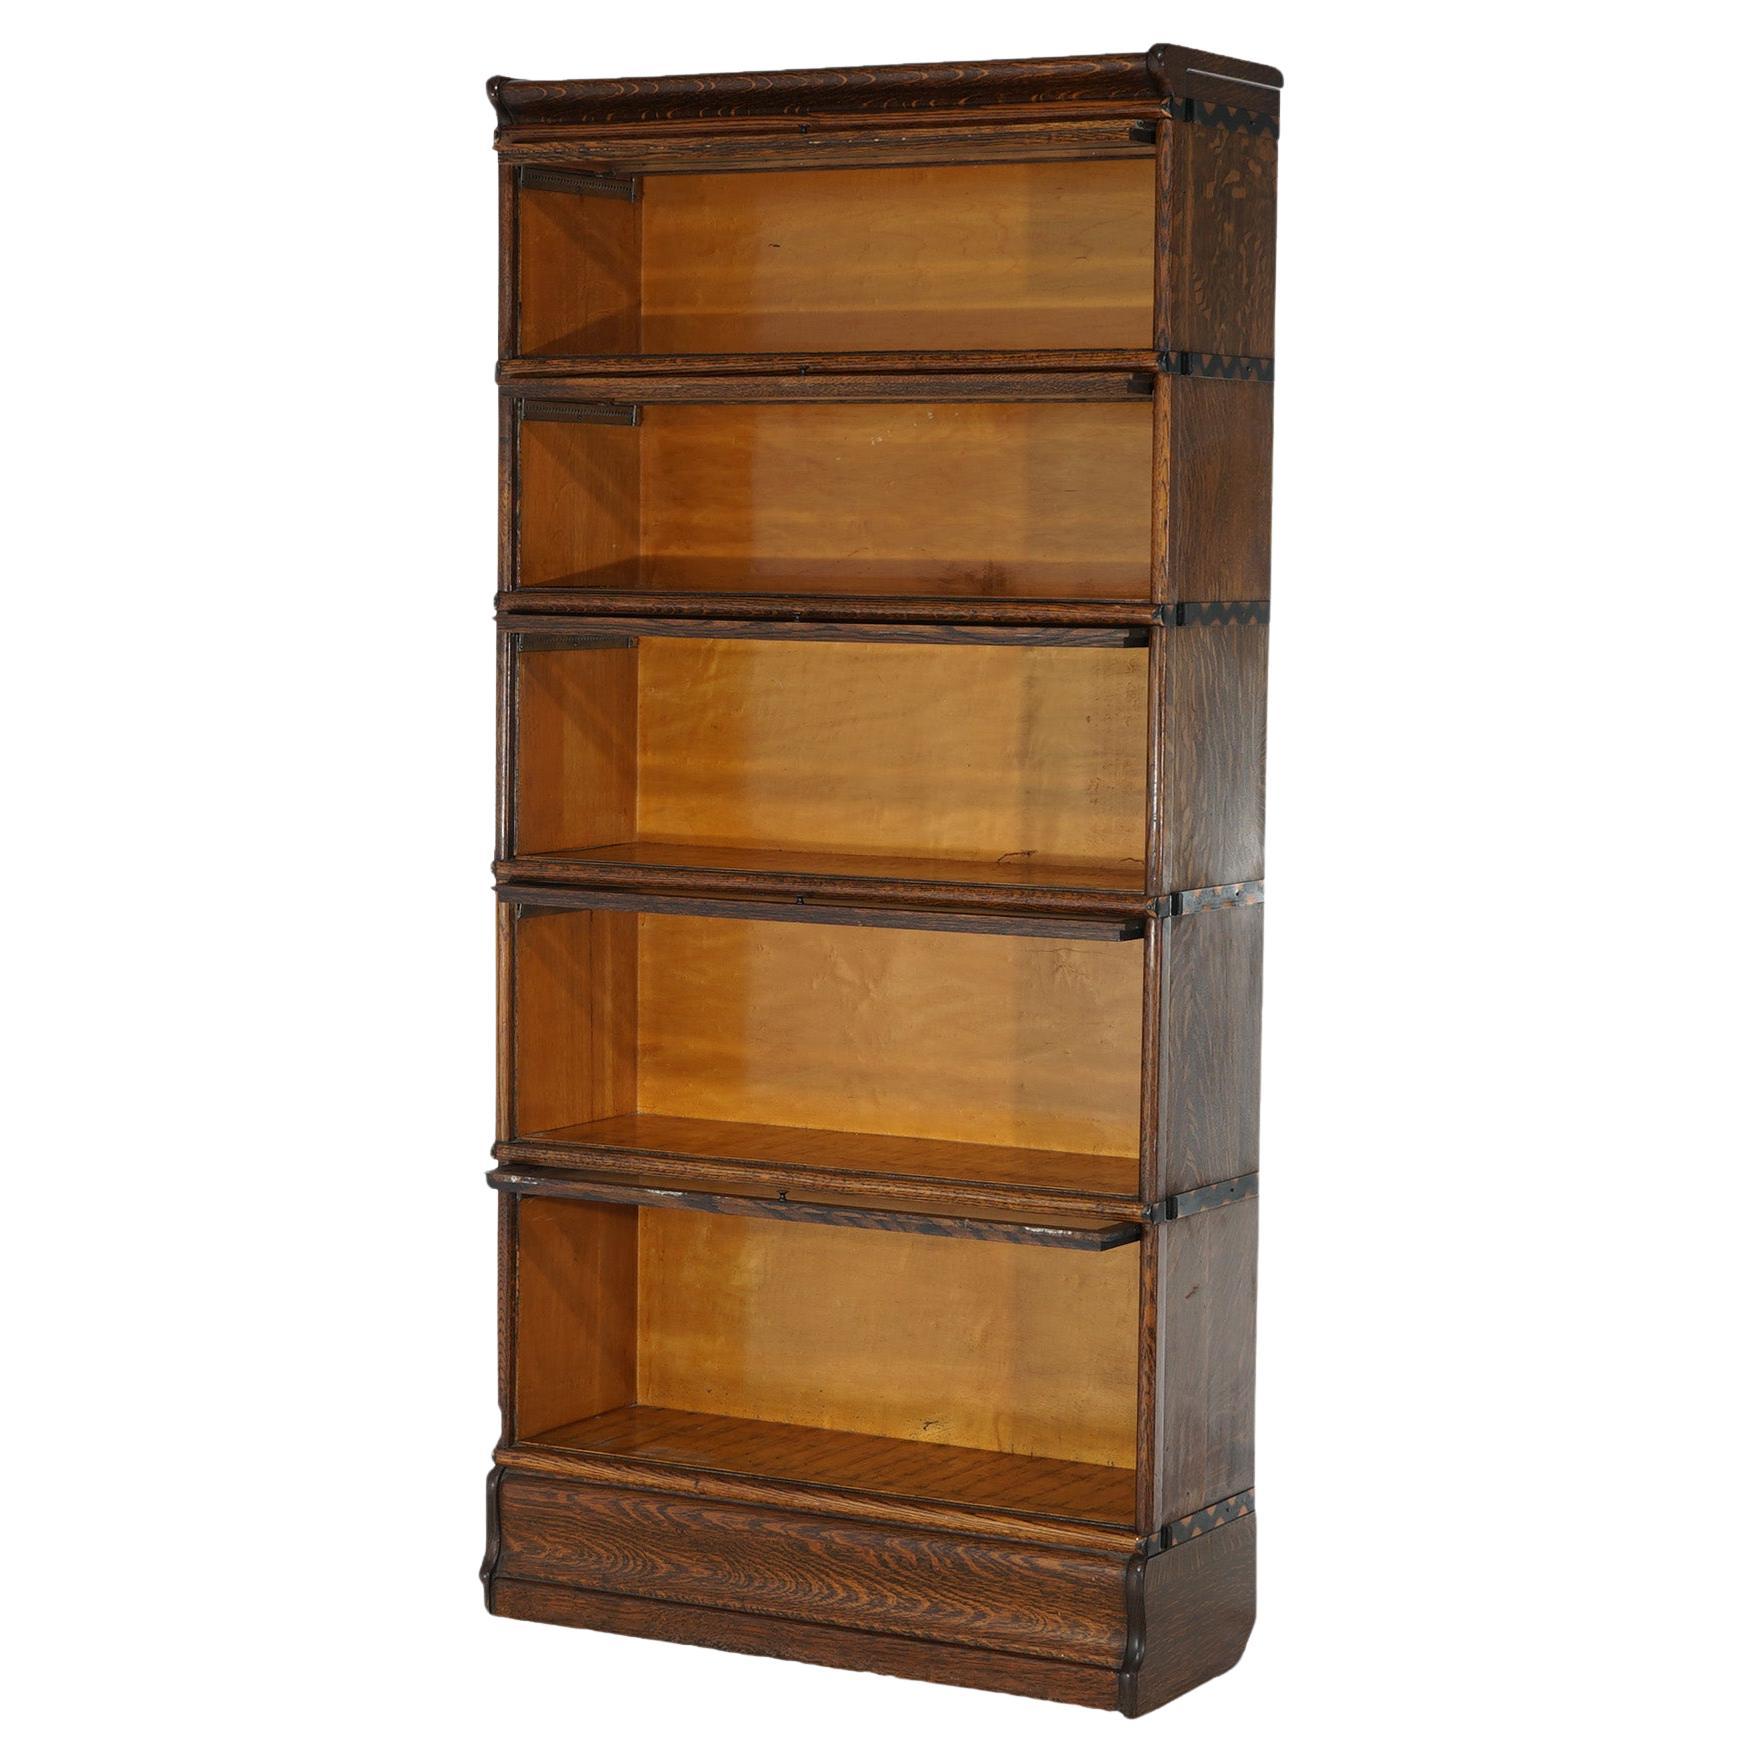 An antique Arts and Crafts barrister bookcase attributed to Globe Wernicke or Macey offers quarter sawn oak construction with five stacks, each having pull-out glass doors, raised on an ogee base, c1910

Measures - 70.75